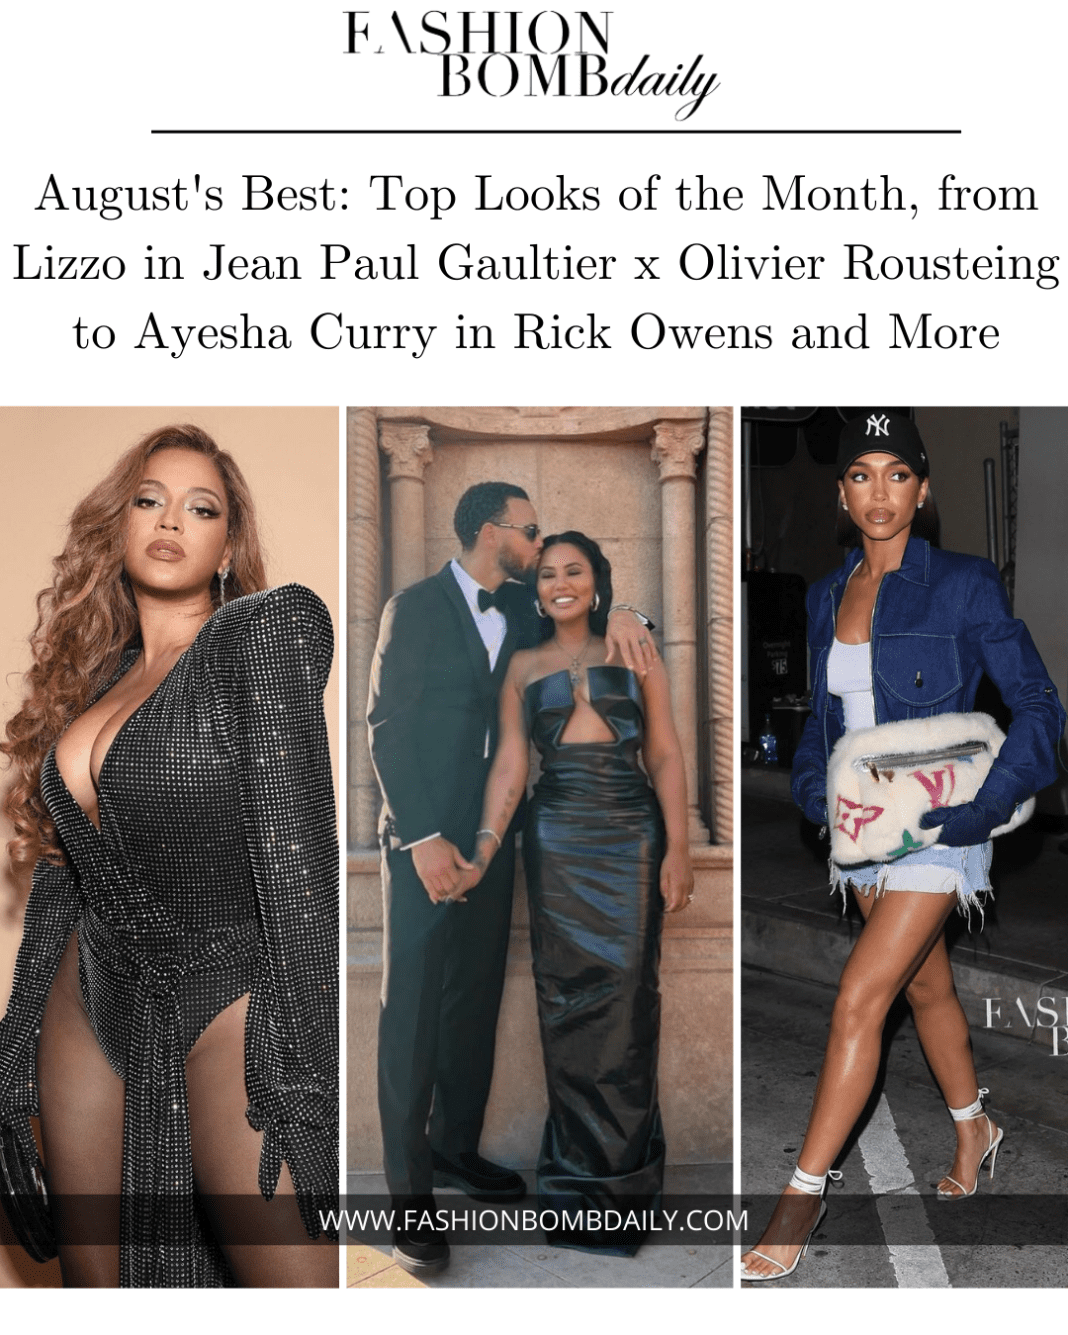 Top Looks of the Month, from Lizzo in Jean Paul Gaultier x Olivier Rousteing to Ayesha Curry in Rick Owens and More